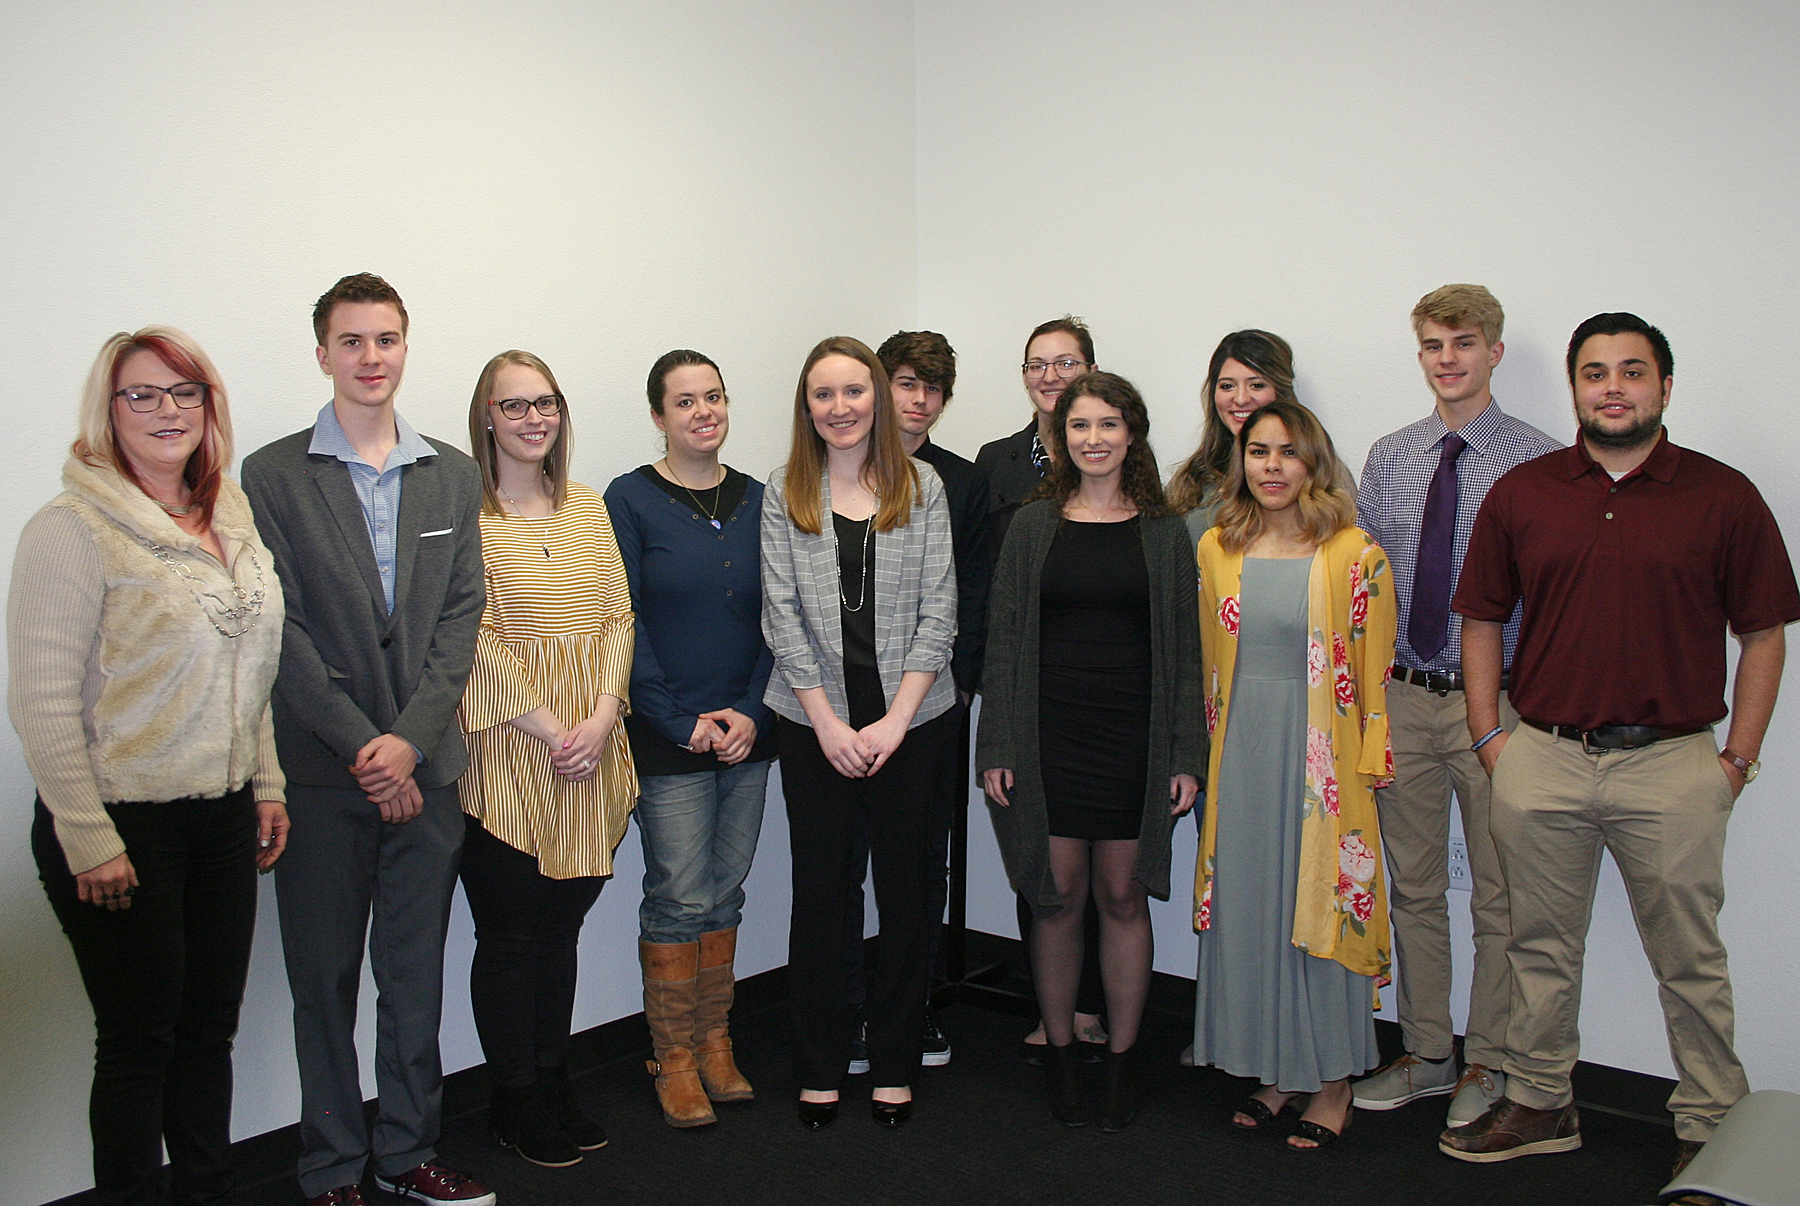 PJC-Sulphur Springs Center Inducts New Members Into Phi Theta Kappa Honor Society